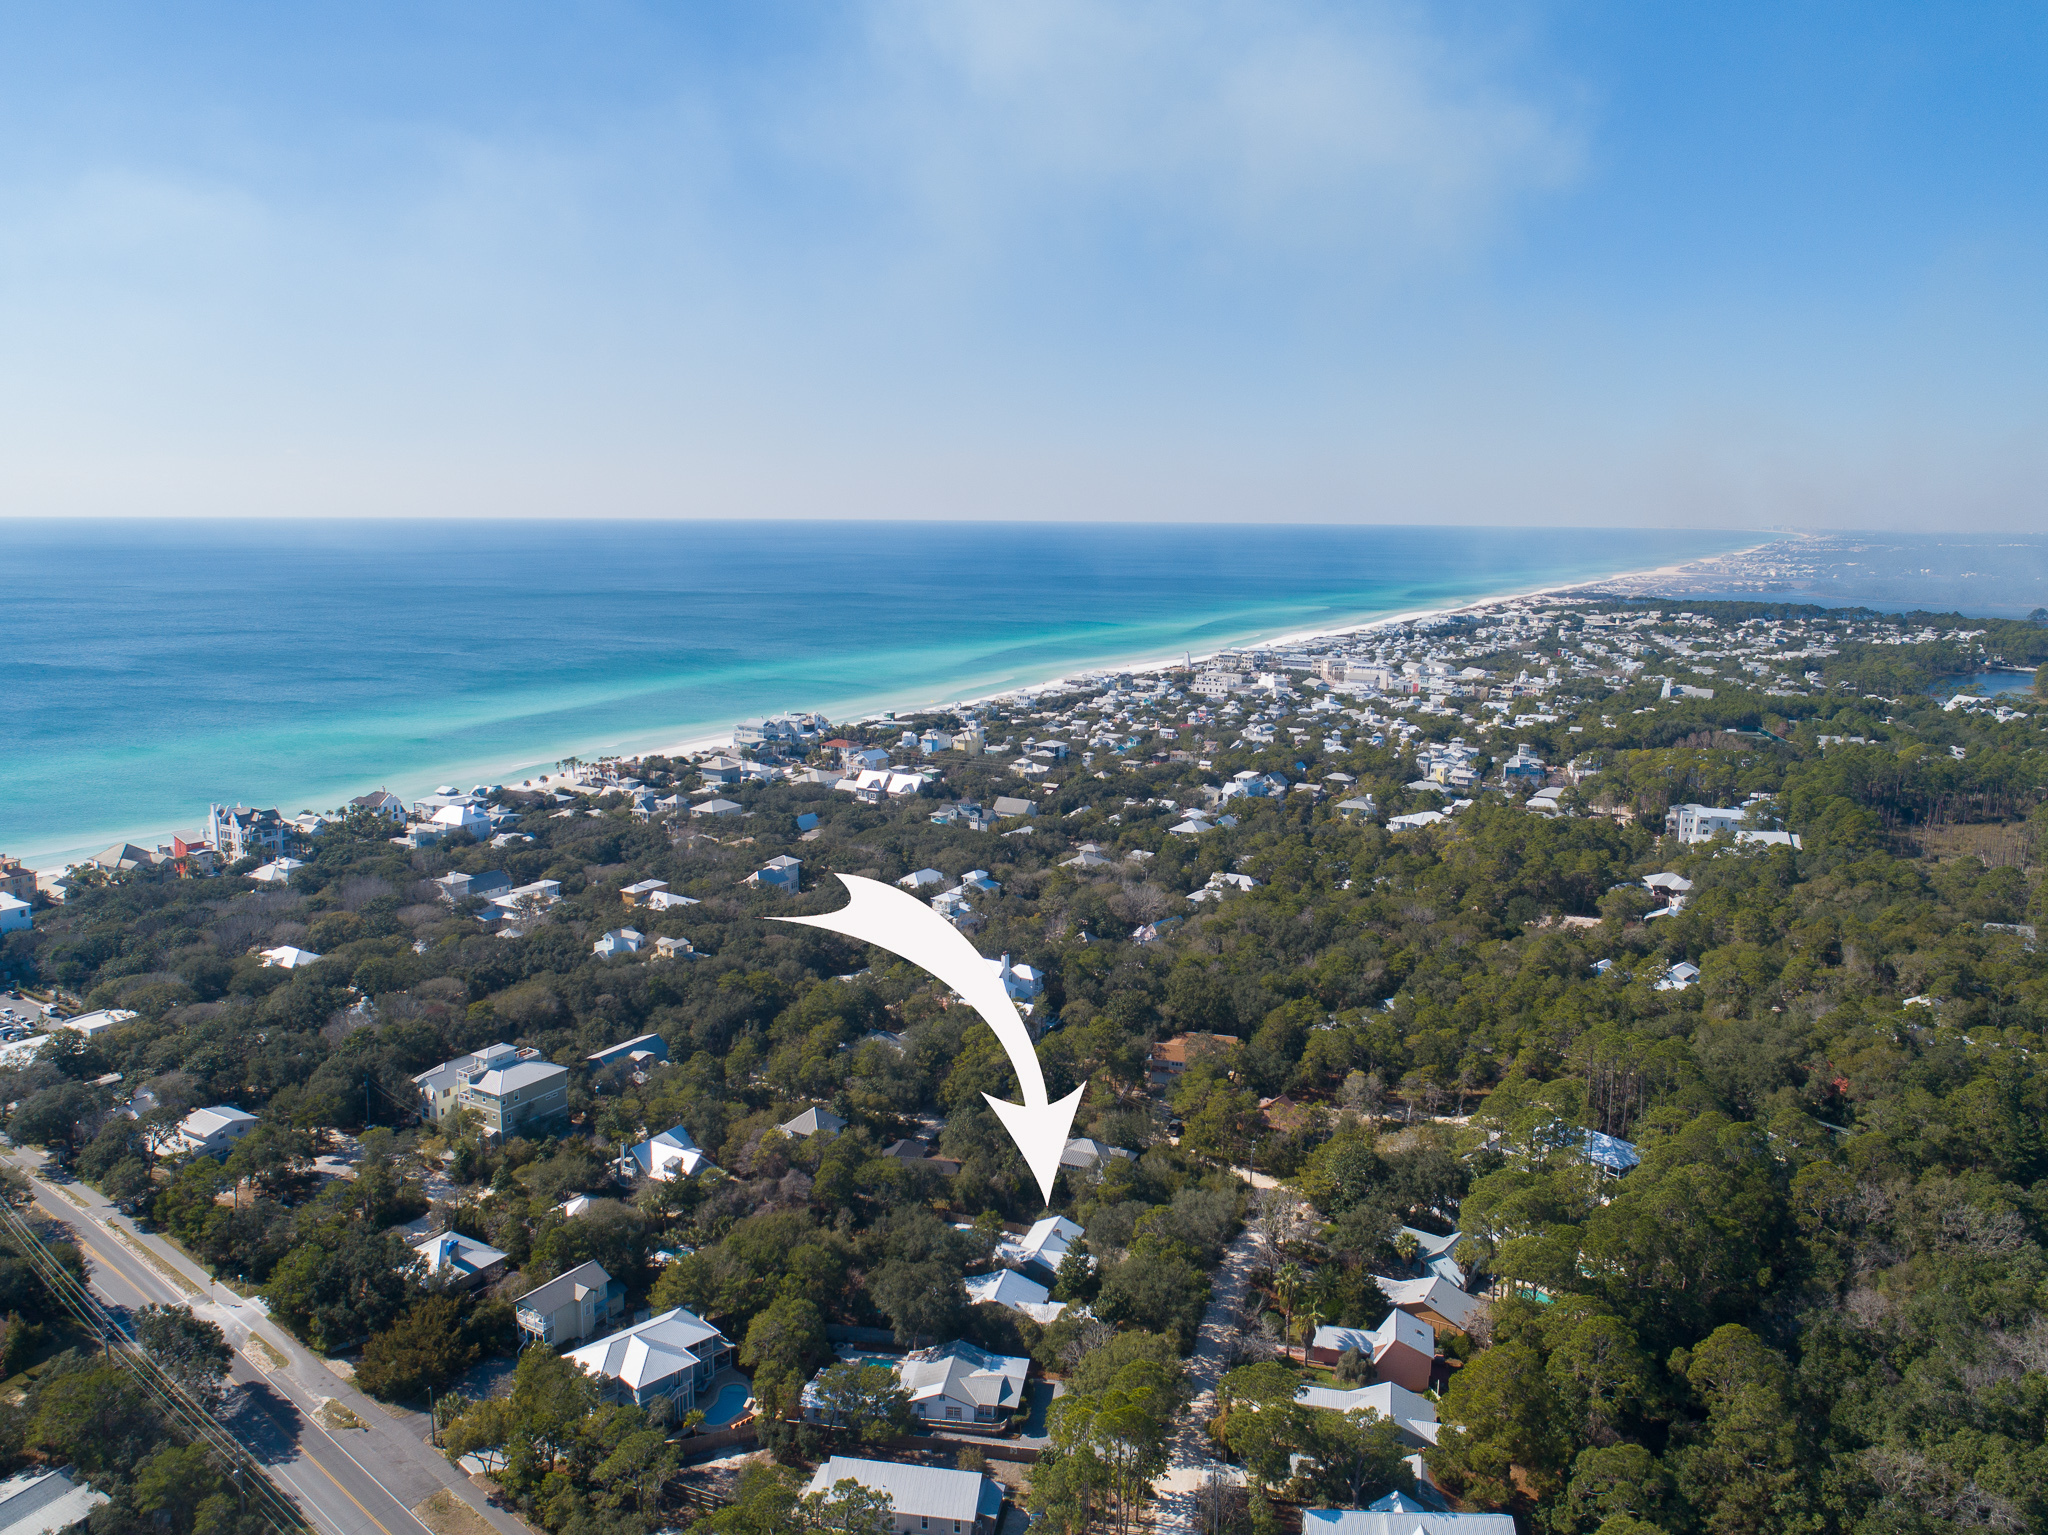 Old Seagrove Beach Homes for Sale on 30A